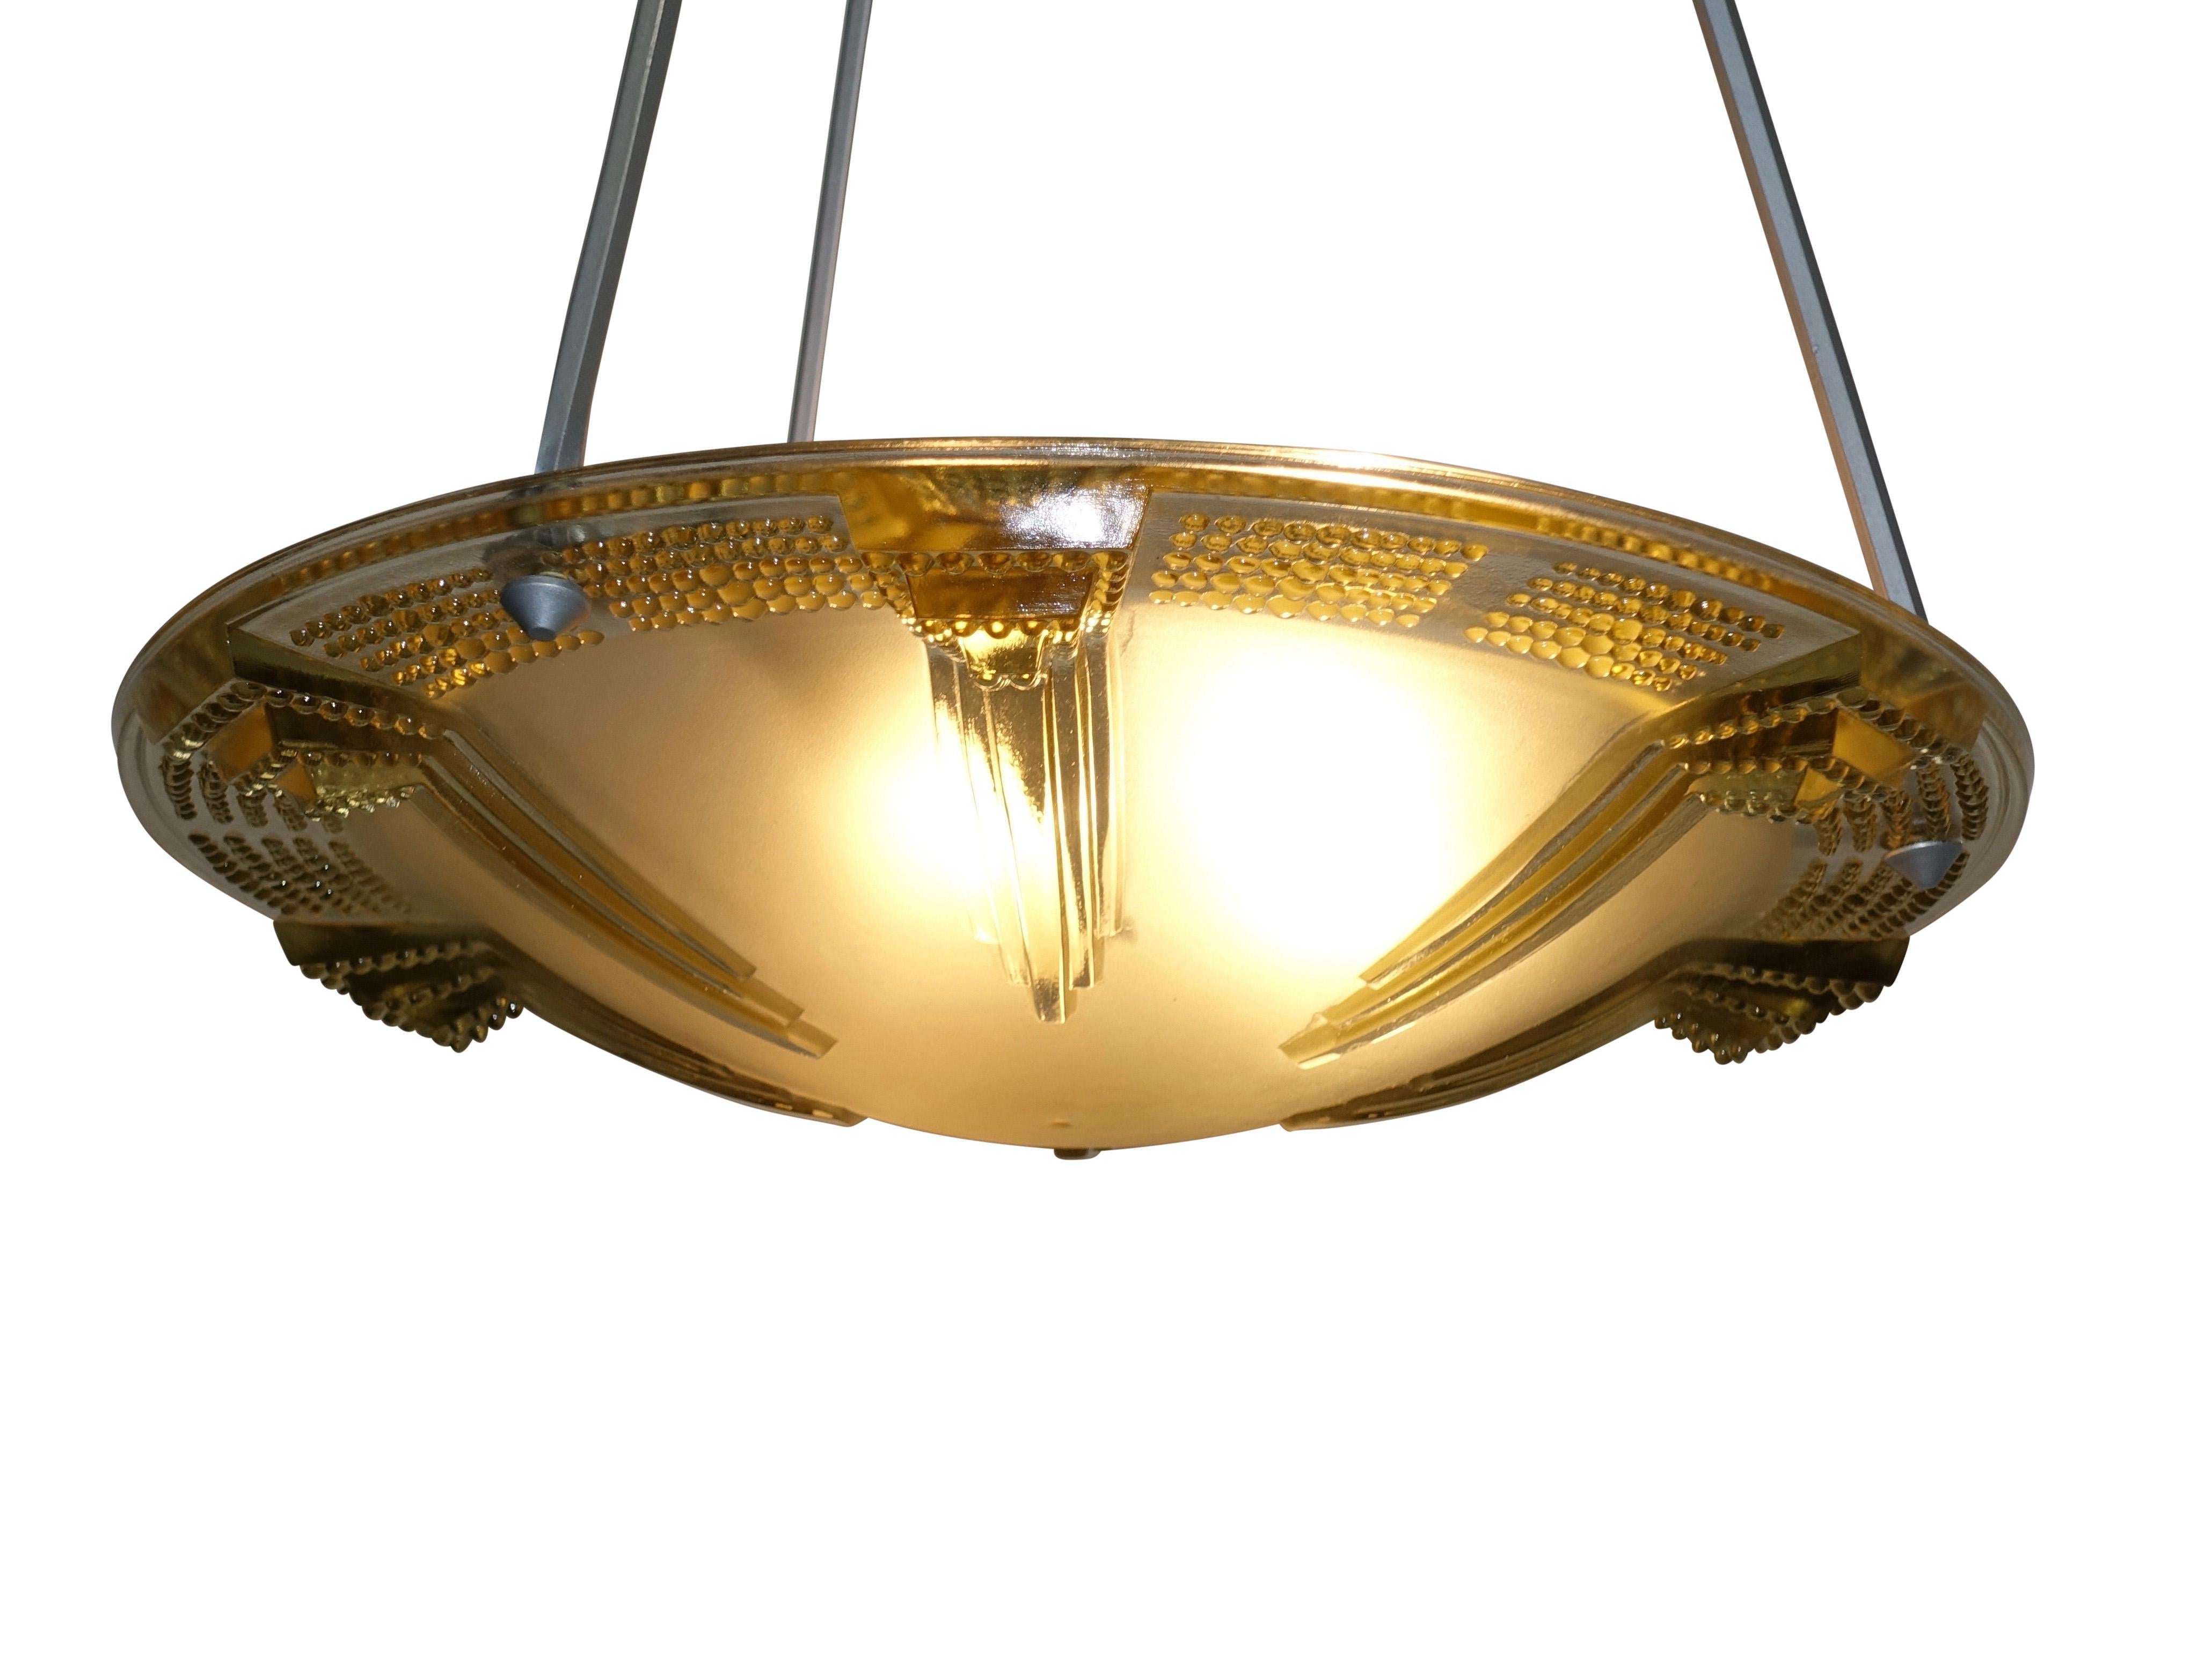 A unique greenish golden color tinted glass hanging pendant light fixture. The design is of graduated and raised towers pointing towards the center, and having a rim of graduated raised nubs, suspended from three silvered hexagonal shaped arms.